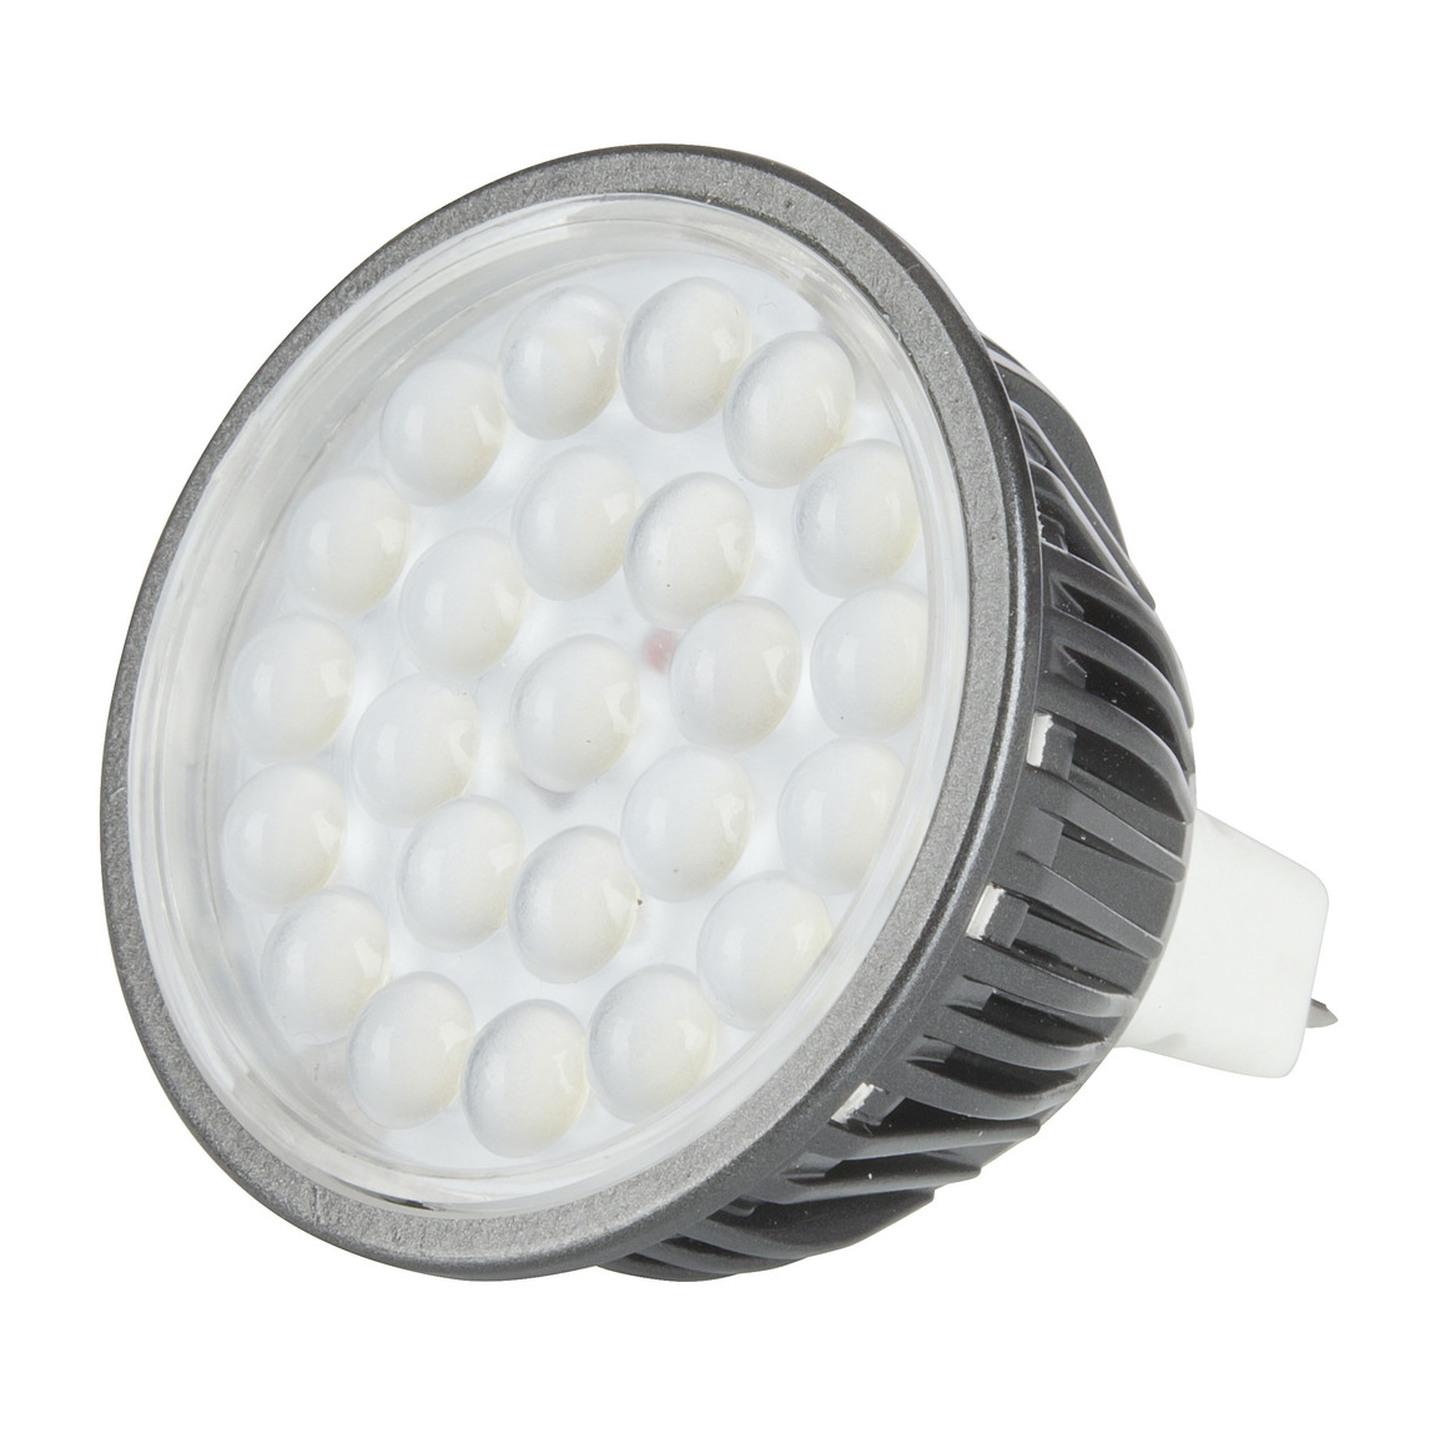 MR16 24x2835-SMD LED Downlight 60 Cool White